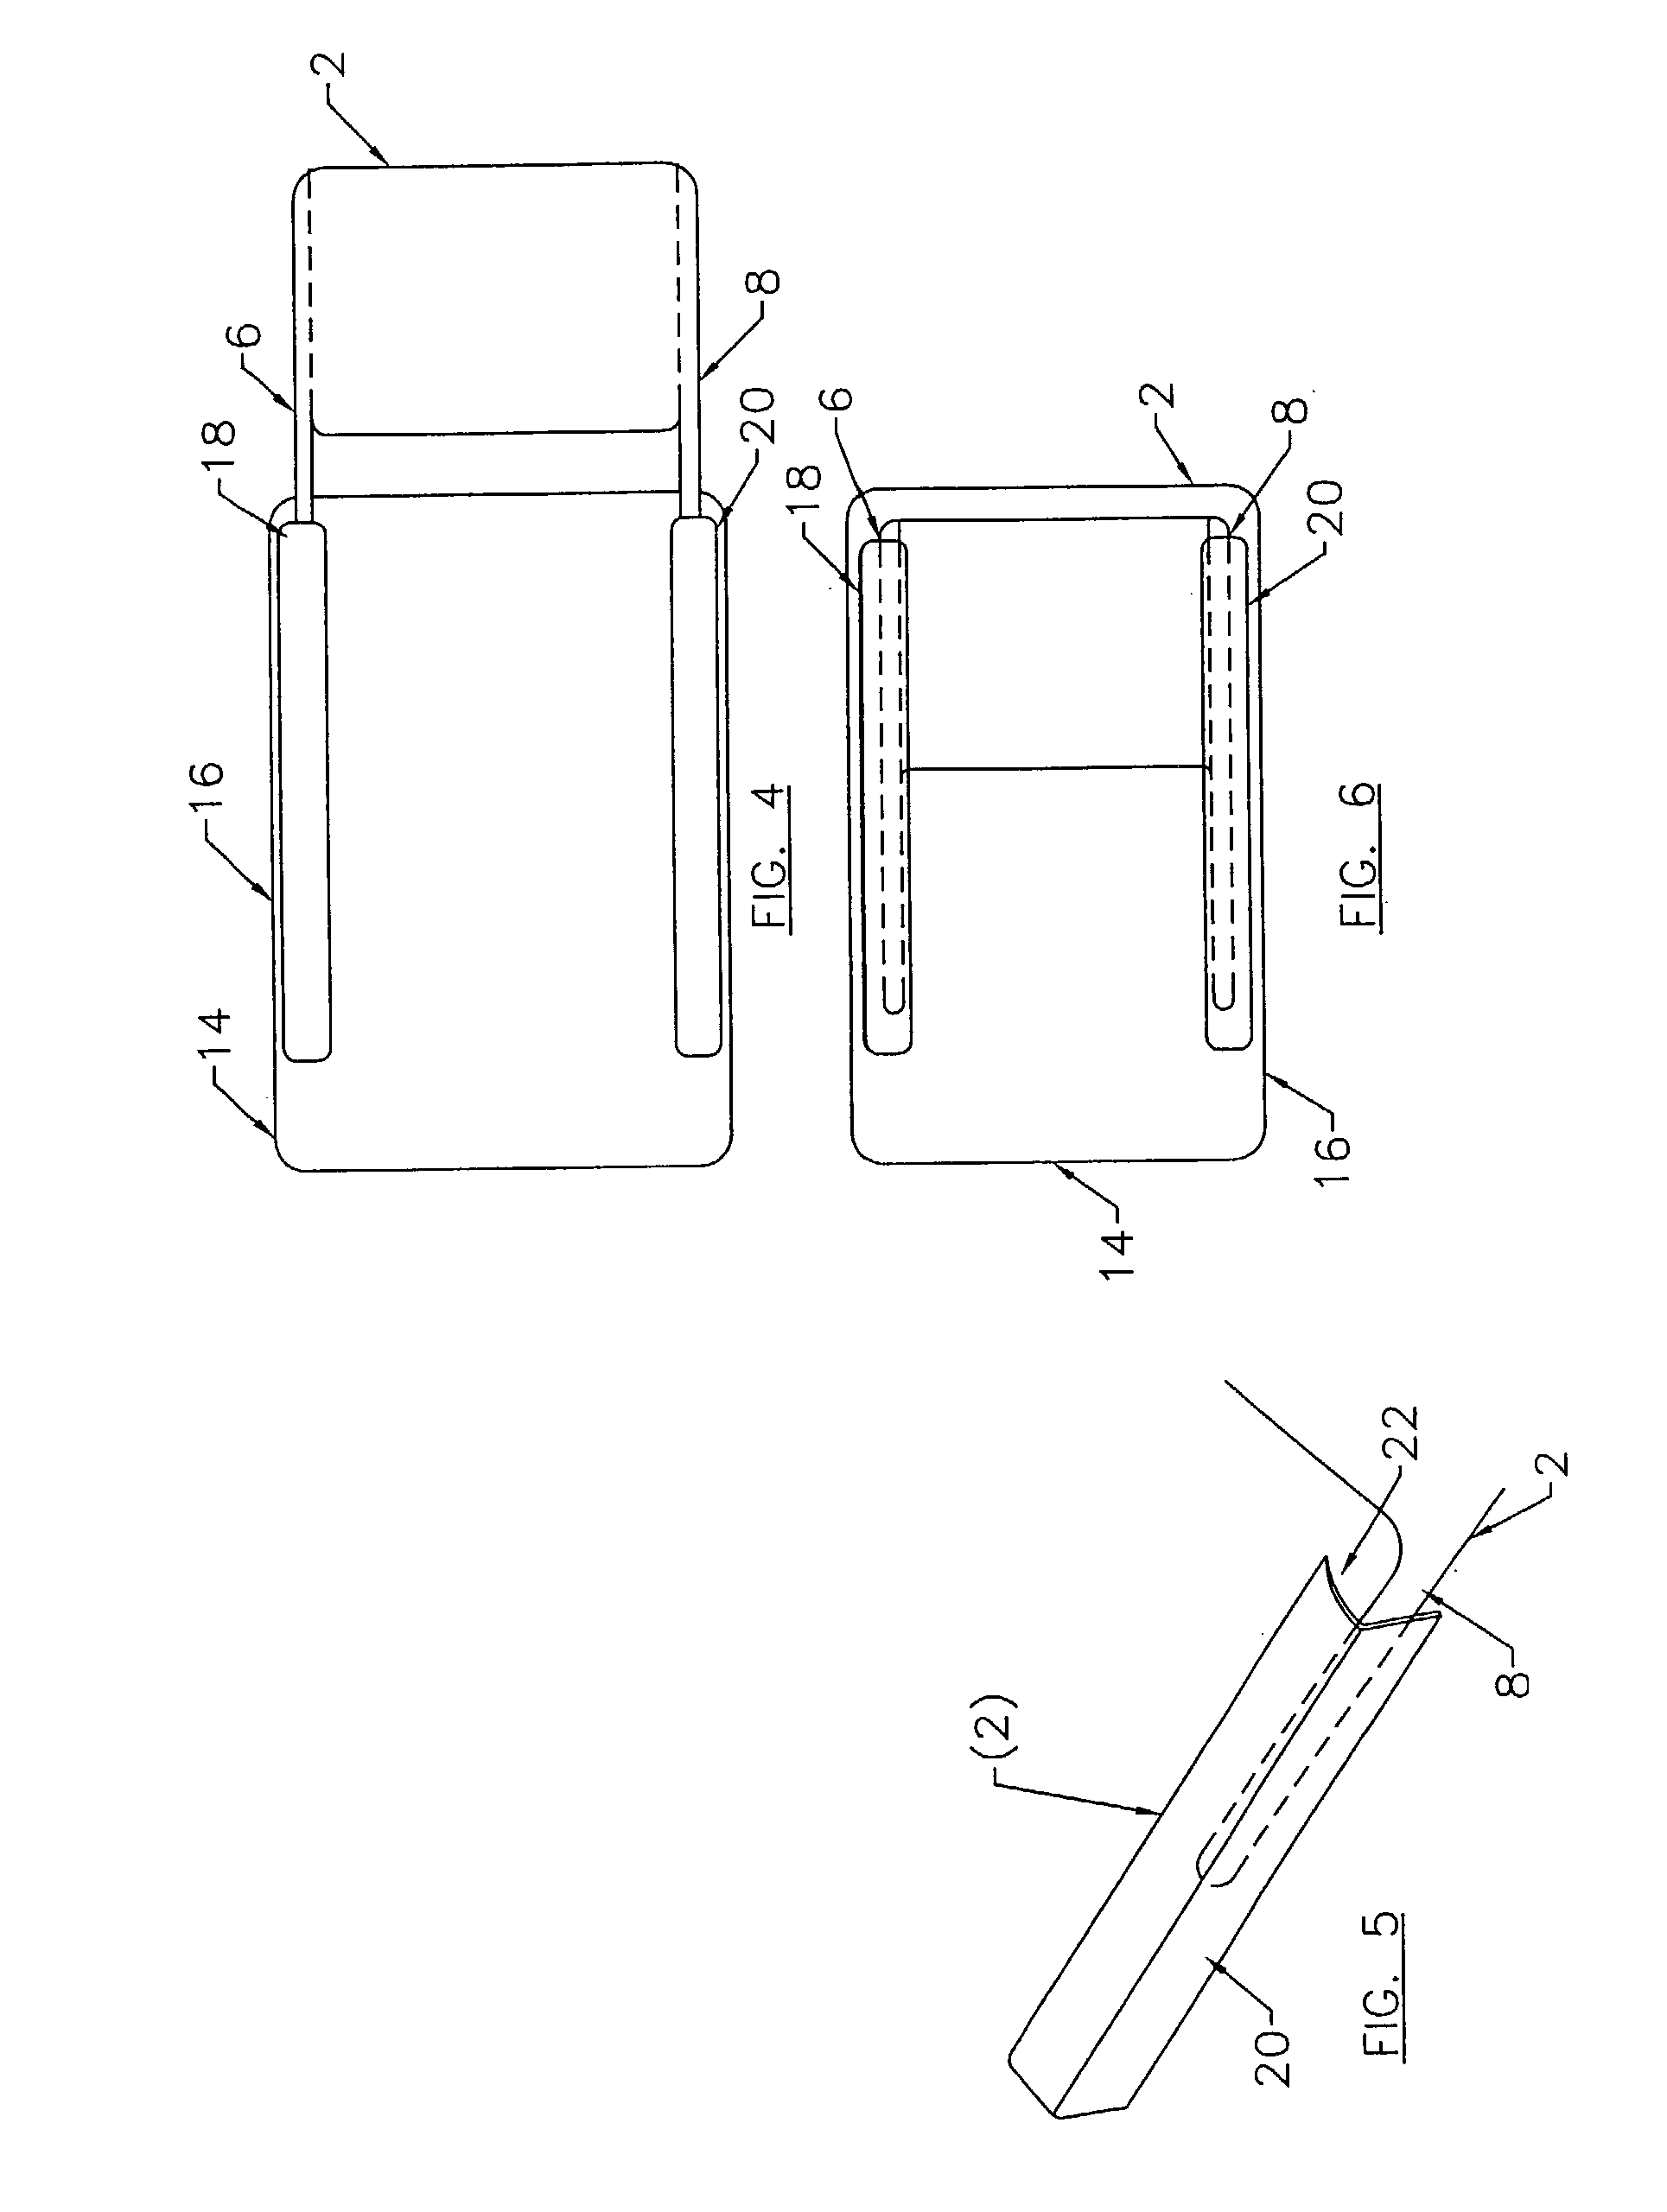 Method and apparatus for holding paper when using a laptop computer